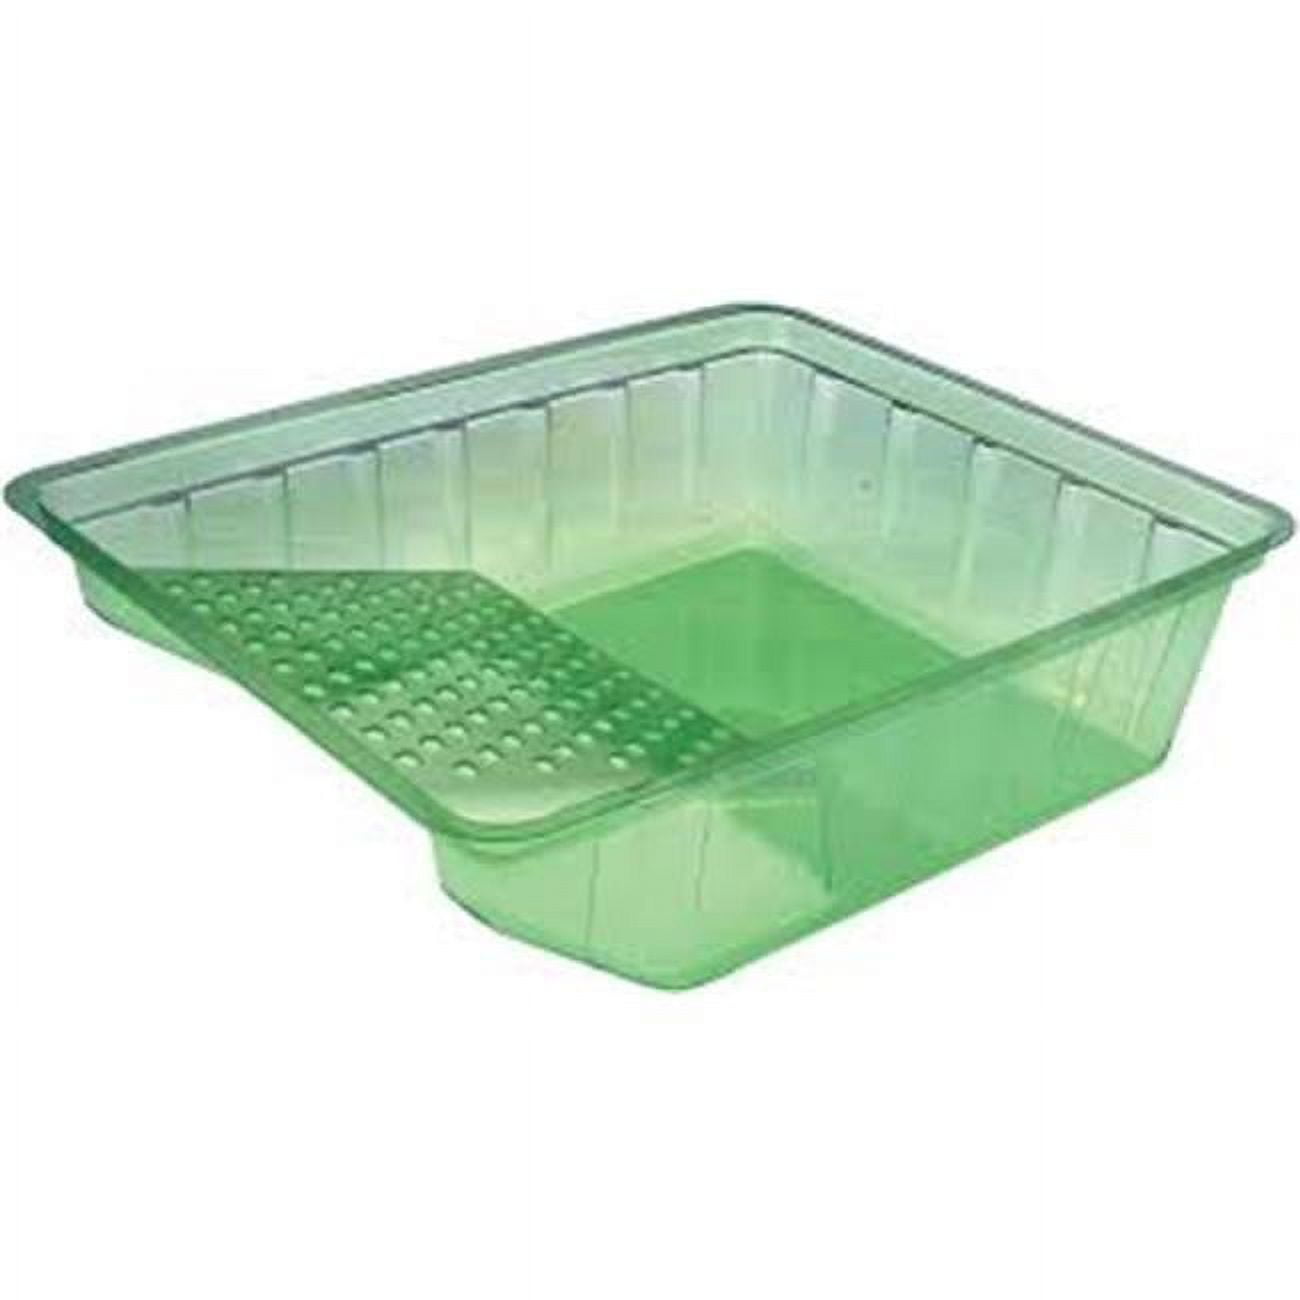 Plastic Activity Tray Manufacturer, Plastic Paint Tray Supplier